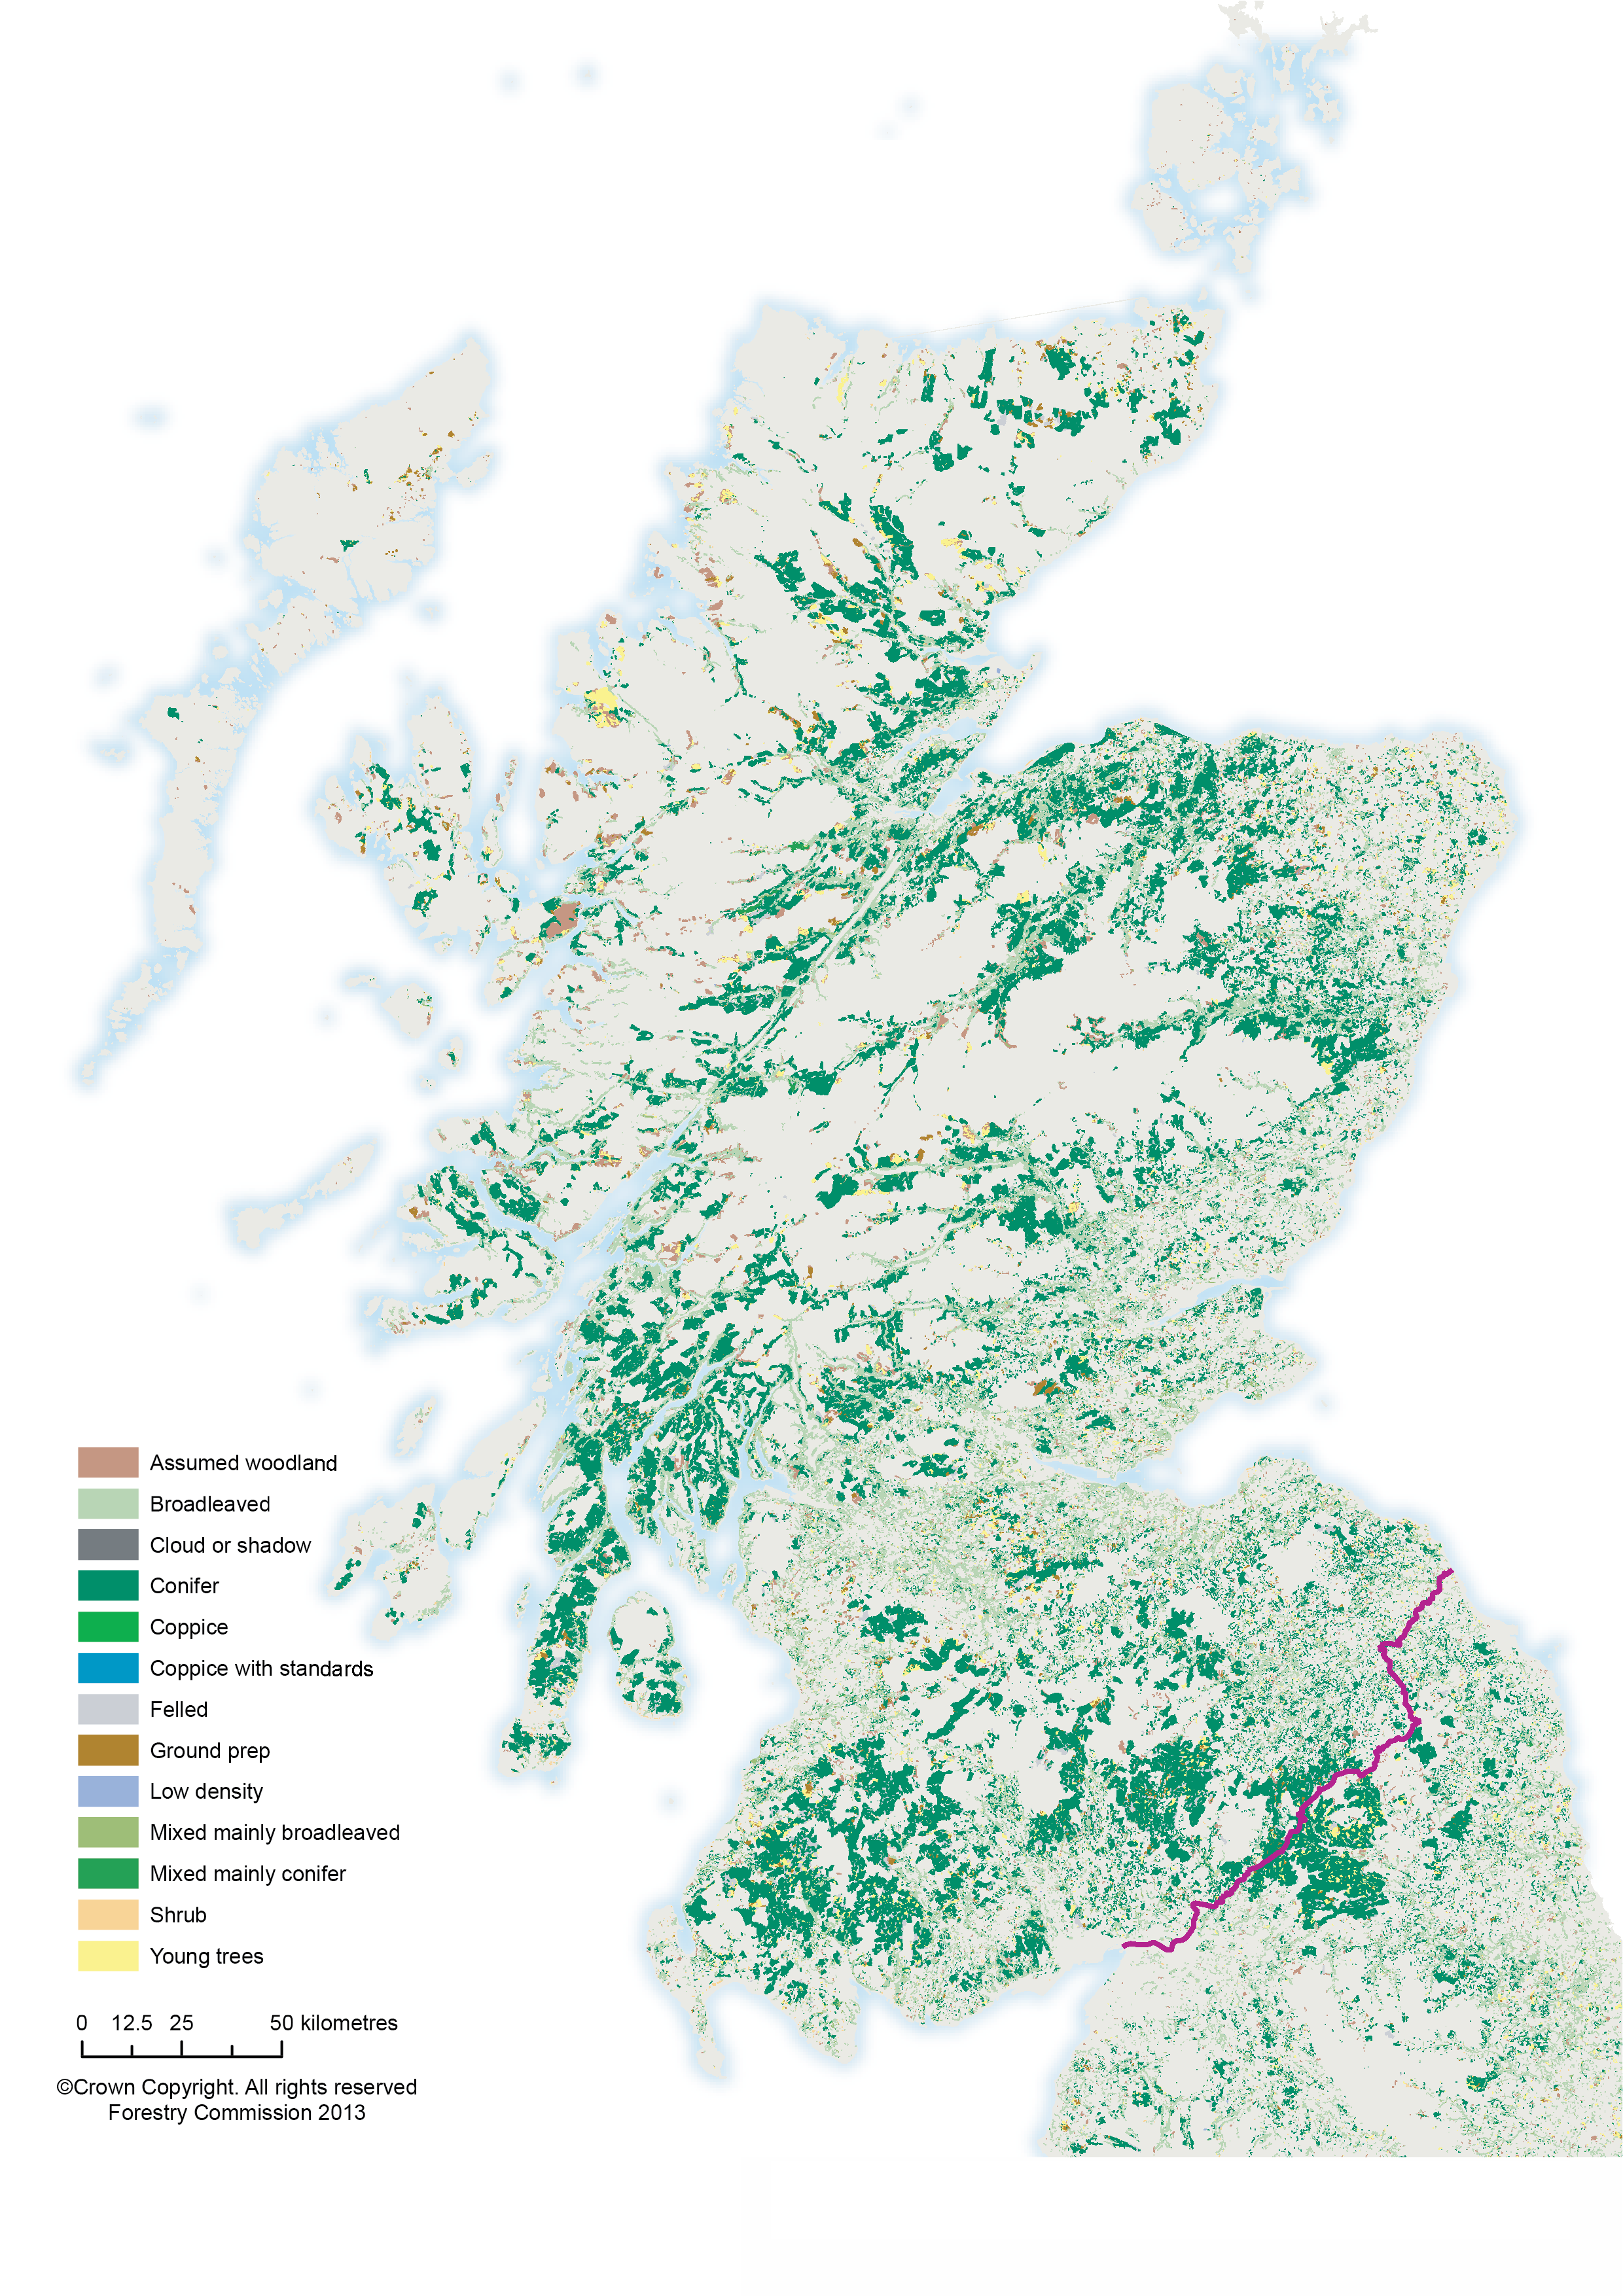 The majority of woodland in Scotland is coniferous